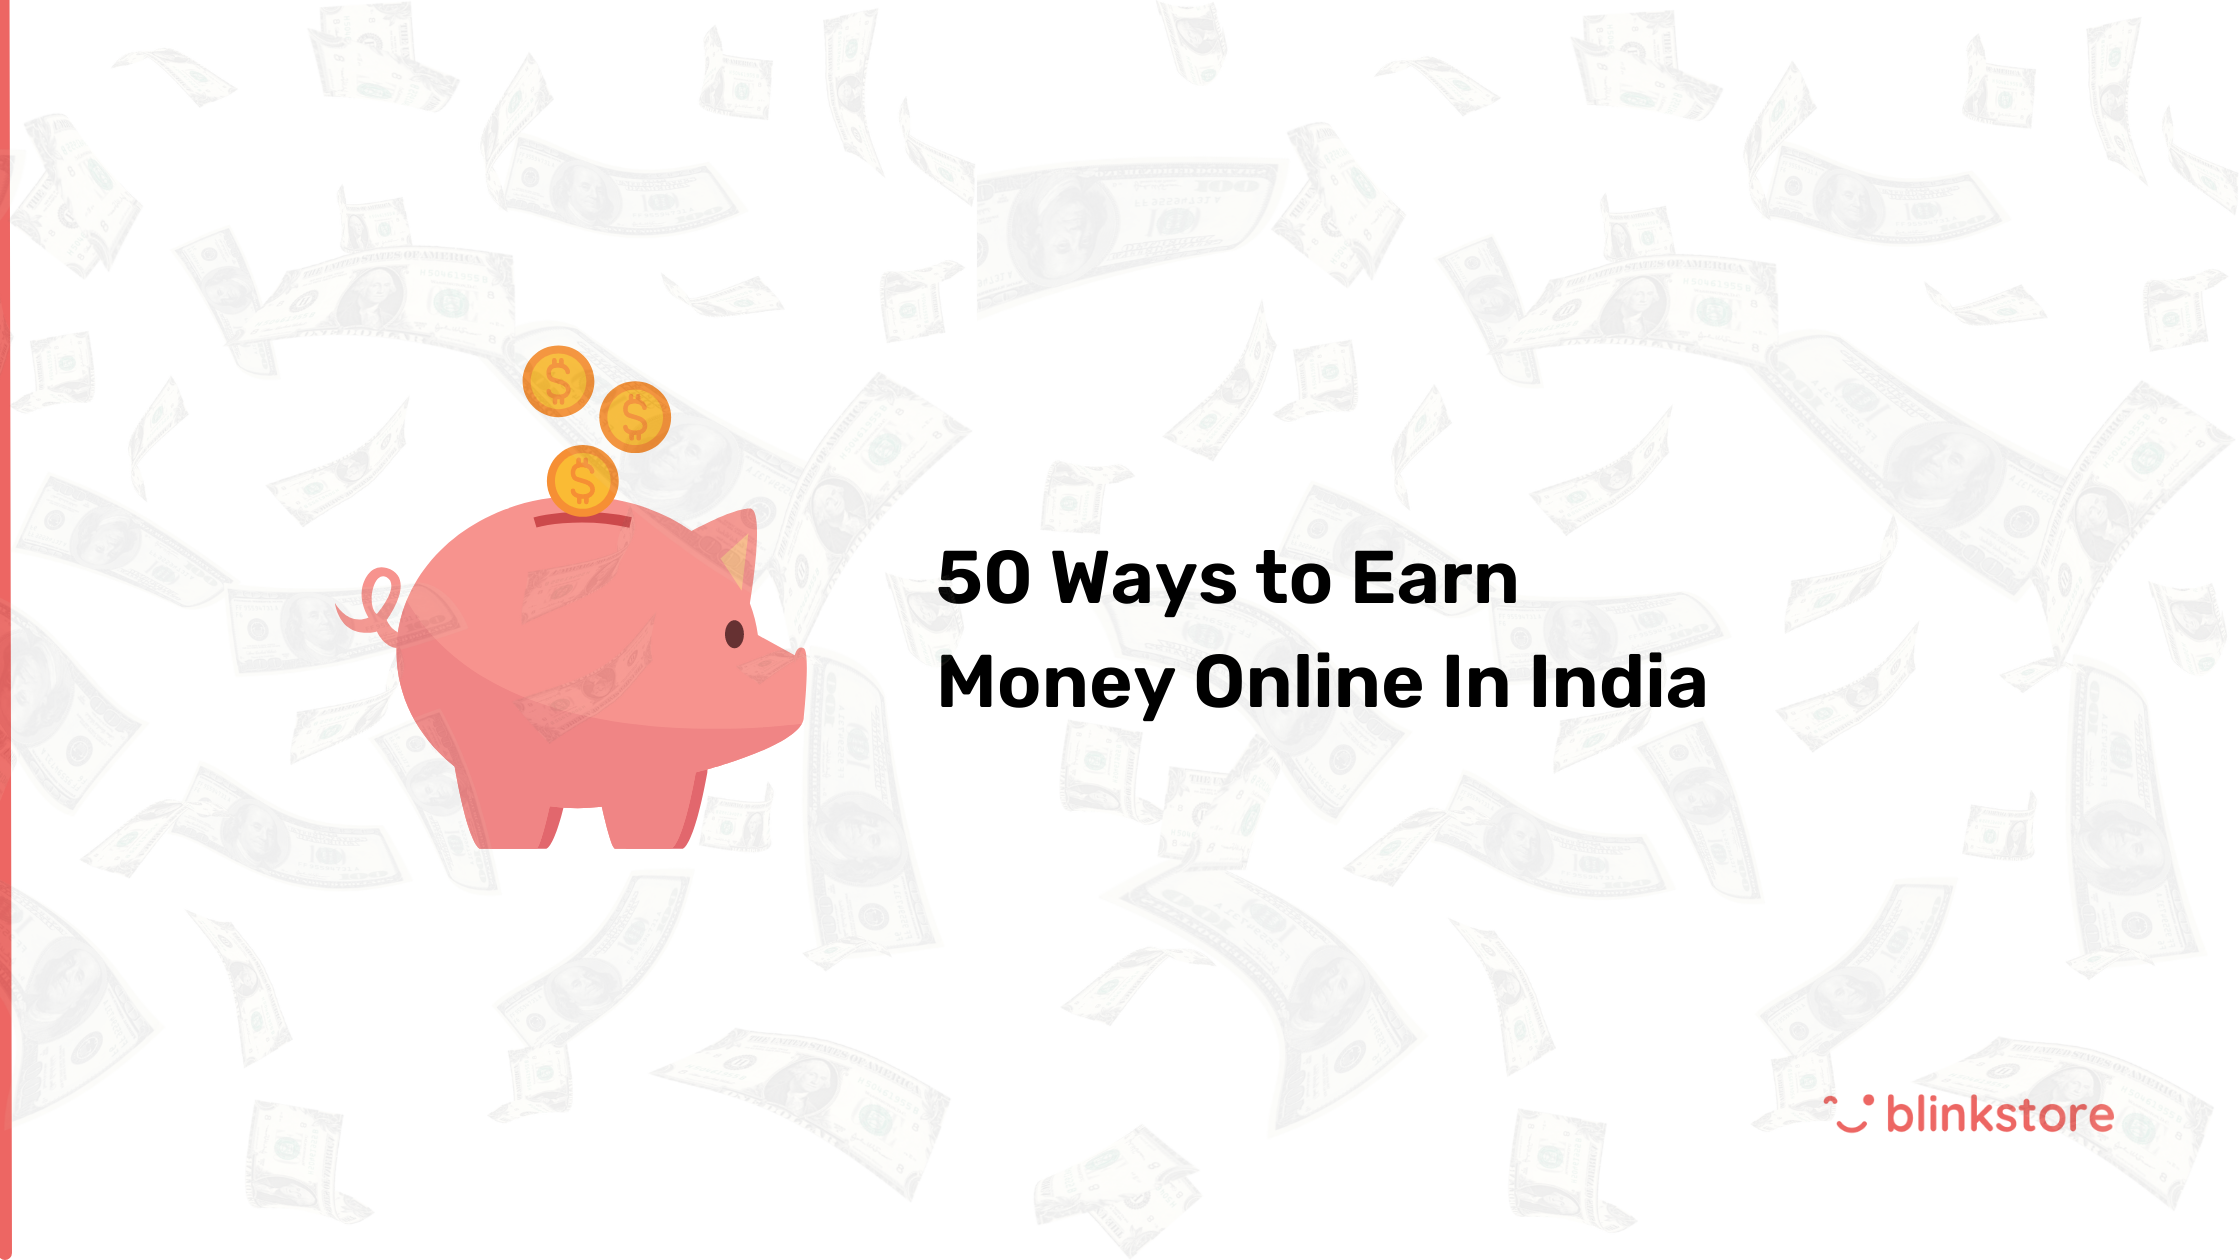 How To Earn Money Online in India (50 Amazing Ideas)